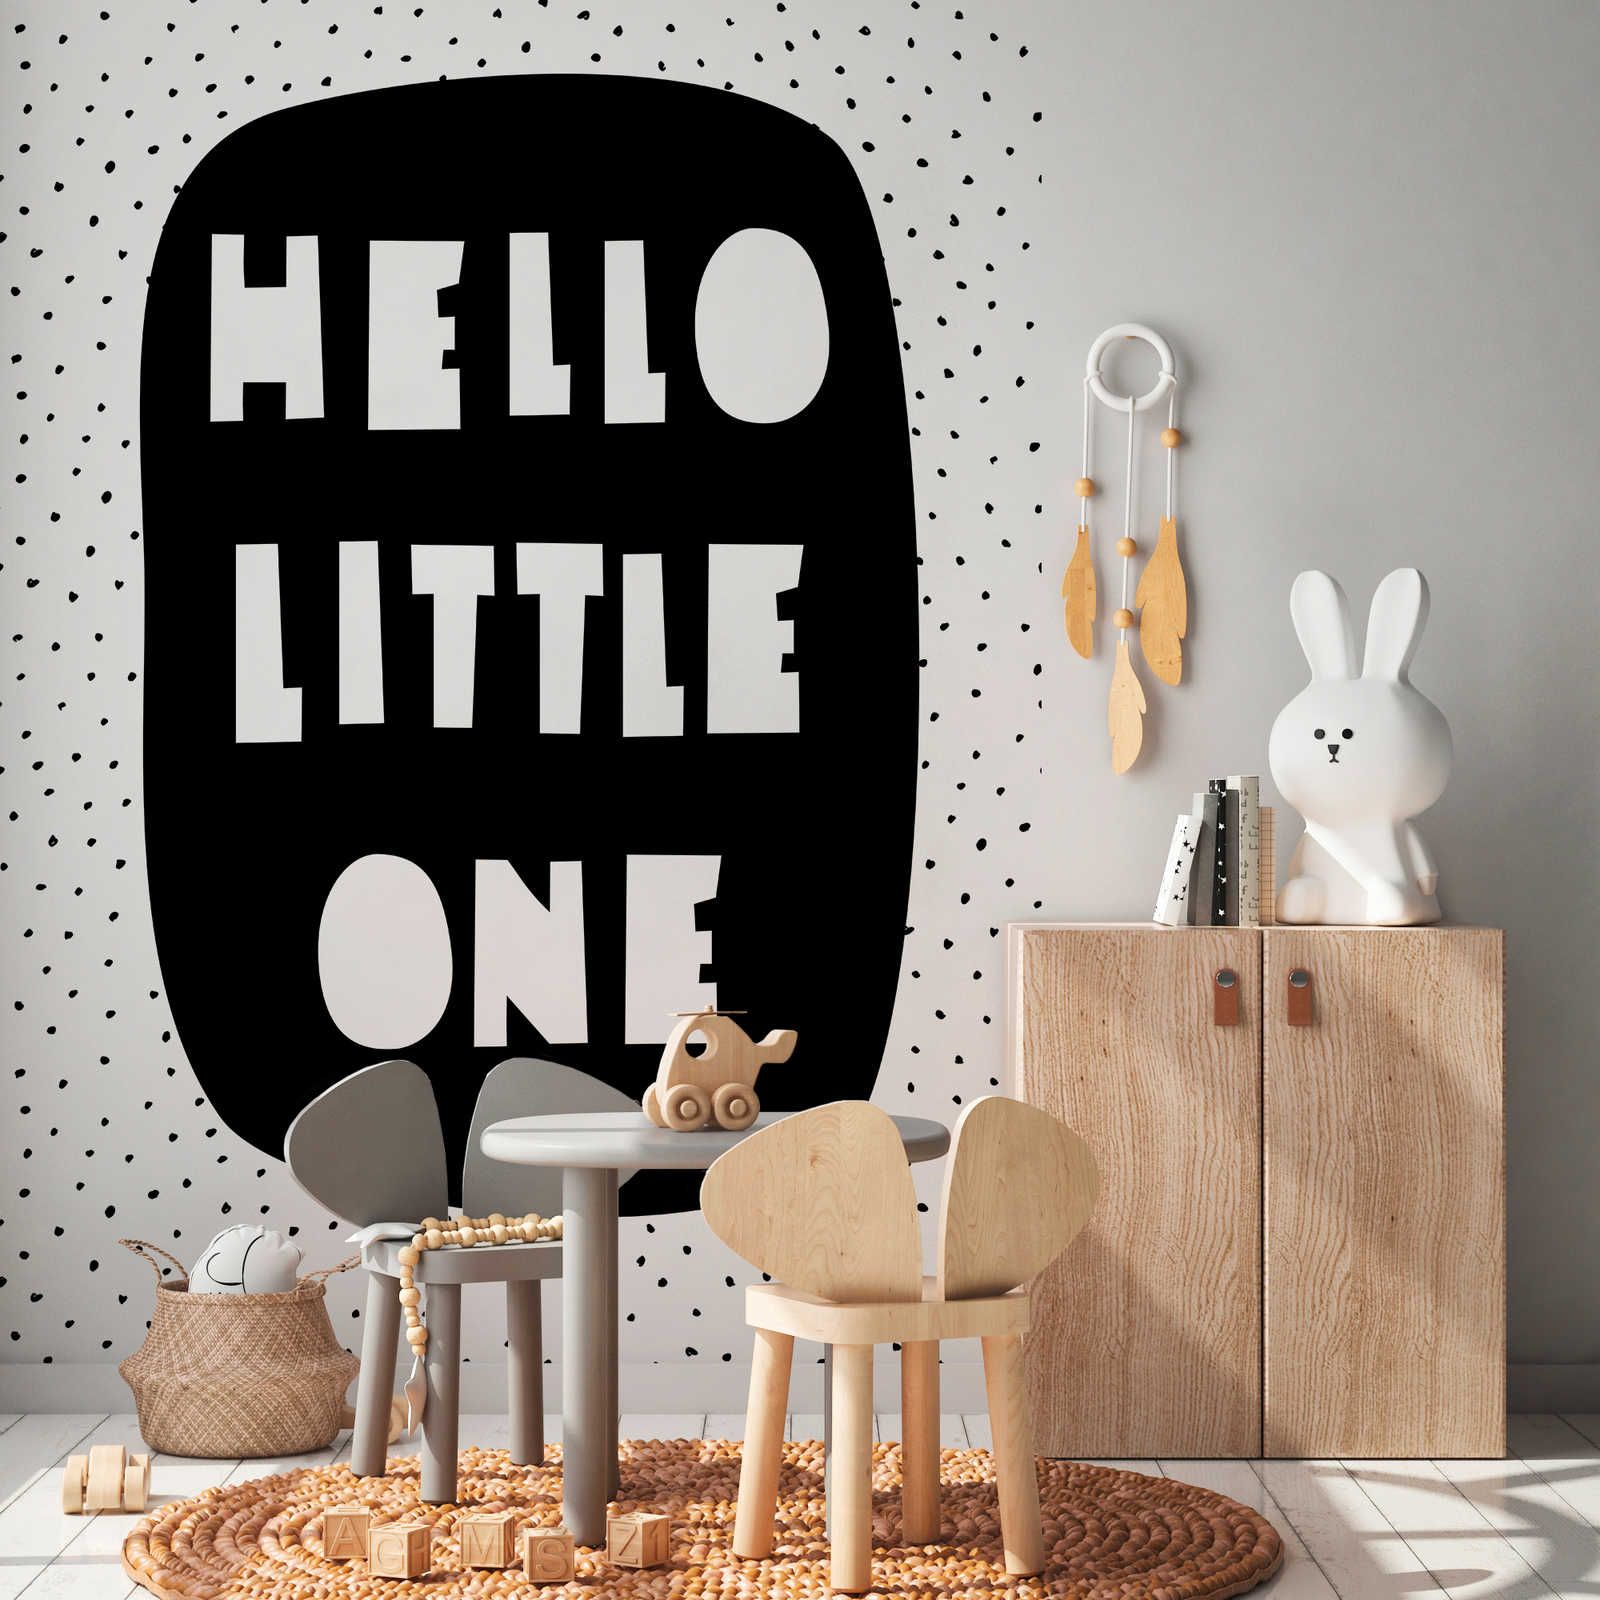 Photo wallpaper for children's room with lettering "Hello Little One" - Smooth & slightly shiny non-woven
